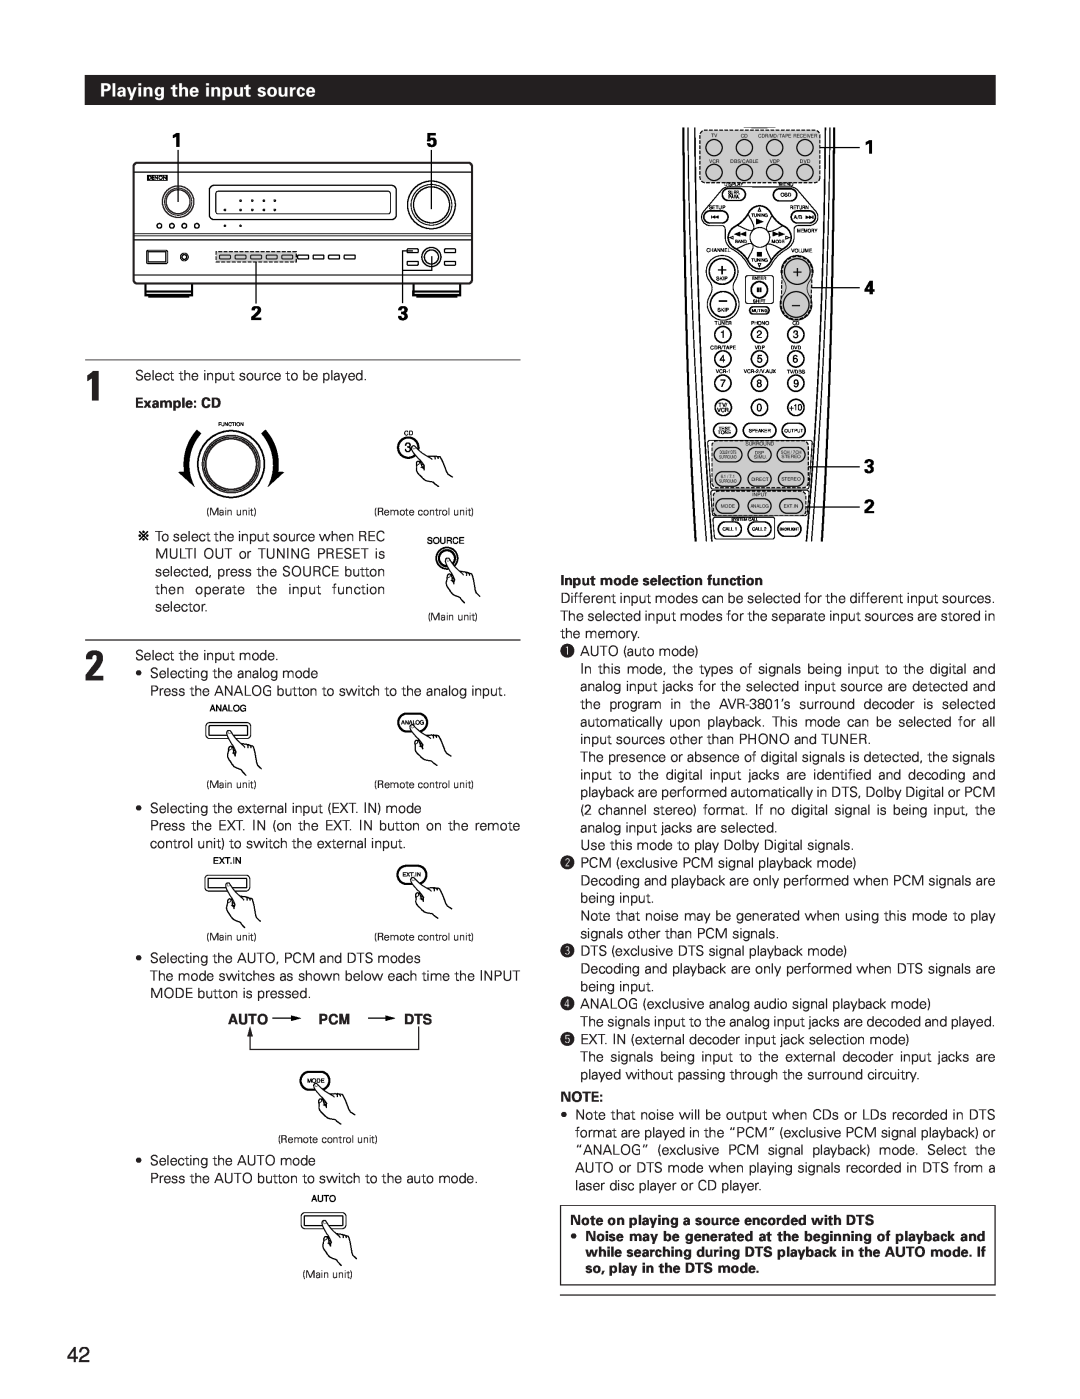 Denon AVR-3801 manual Playing the input source, Example CD, Auto Pcm Dts, Input mode selection function 